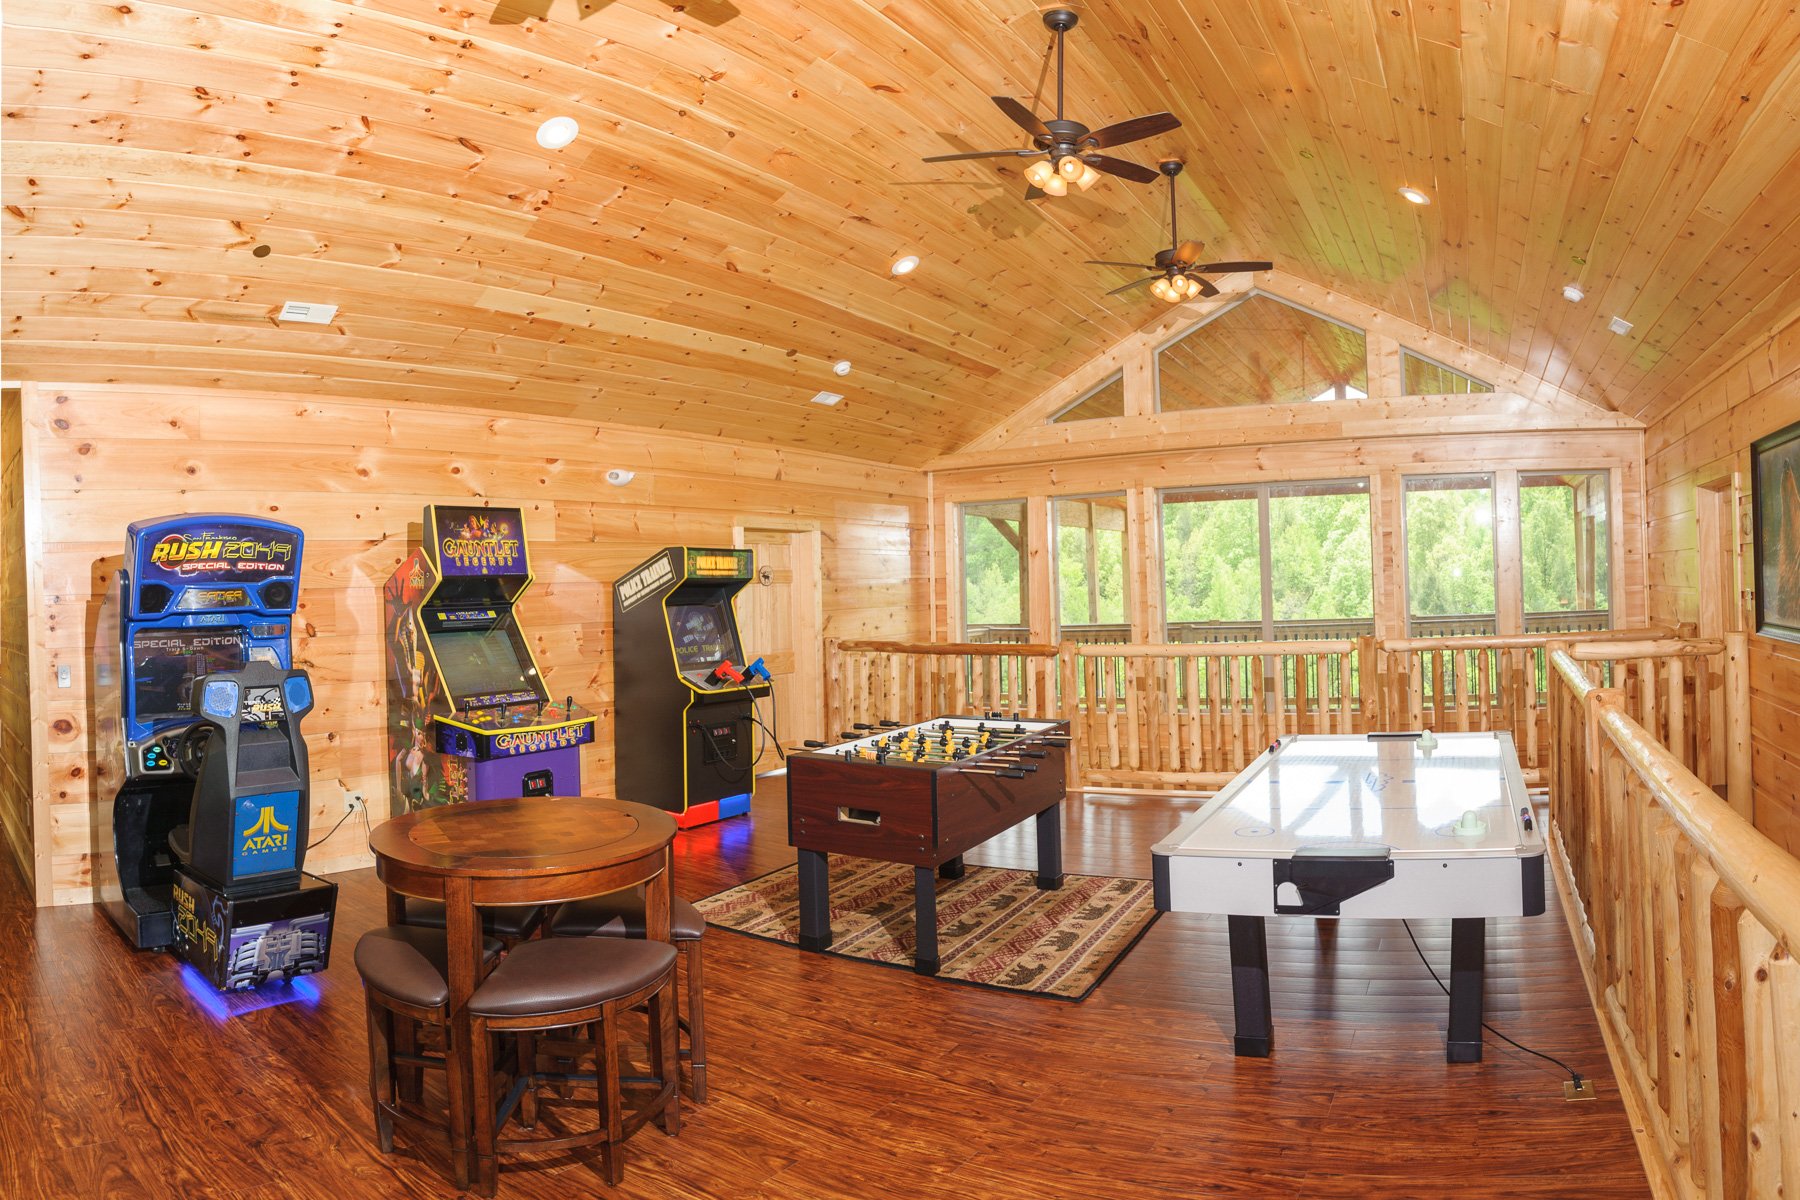 Game Room Includes Arcade Games and Pool Table.